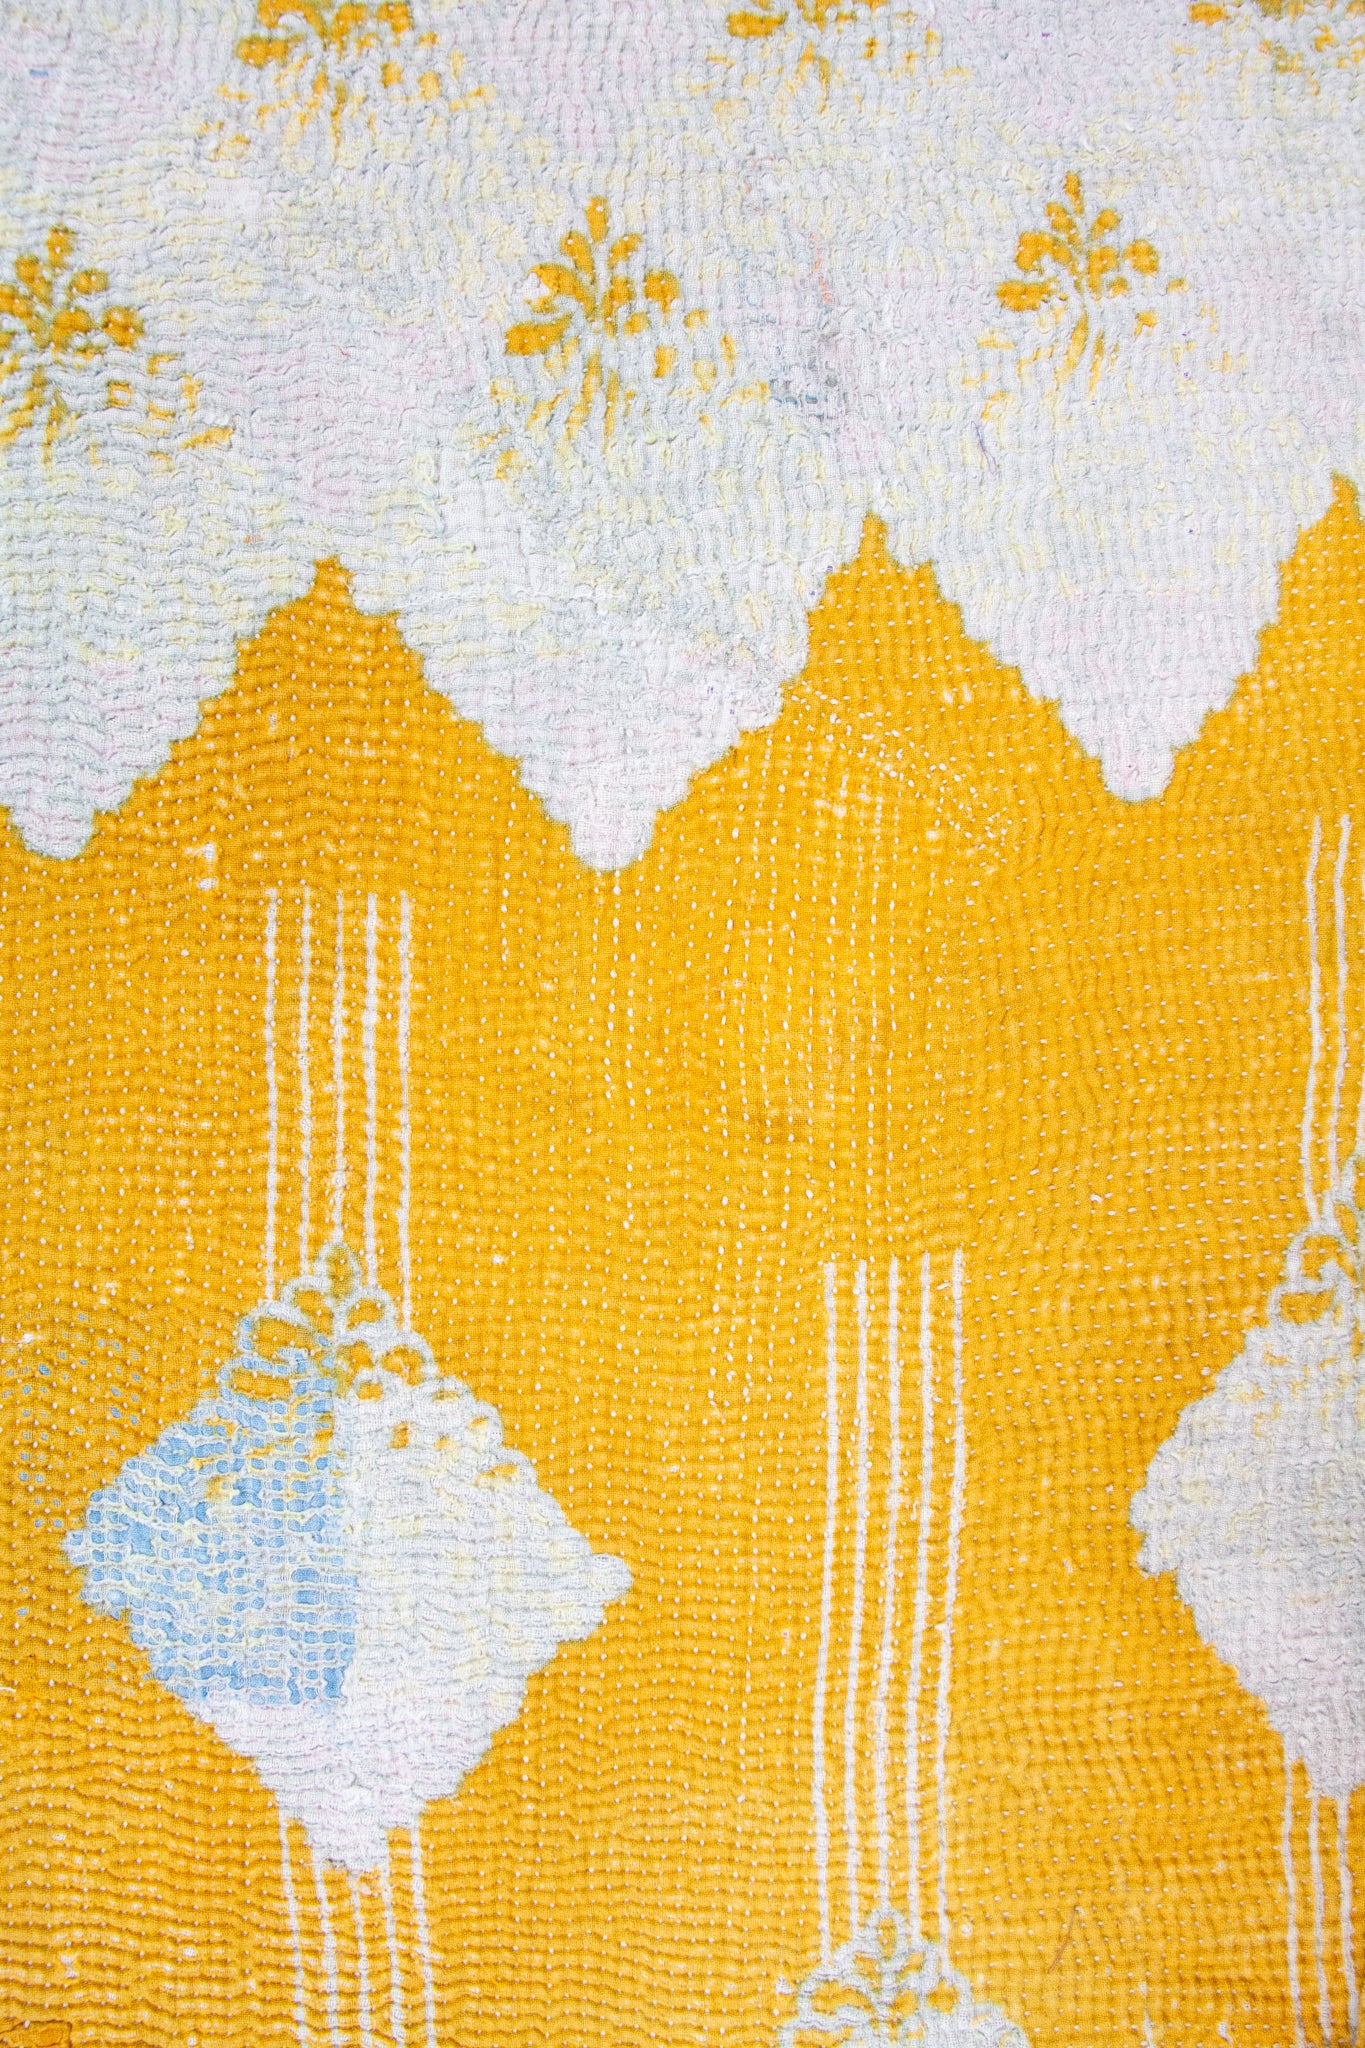 AUNTIE OTI KANTHA LARGE THROW -  OMBRE YELLOW / BLUE / PINK